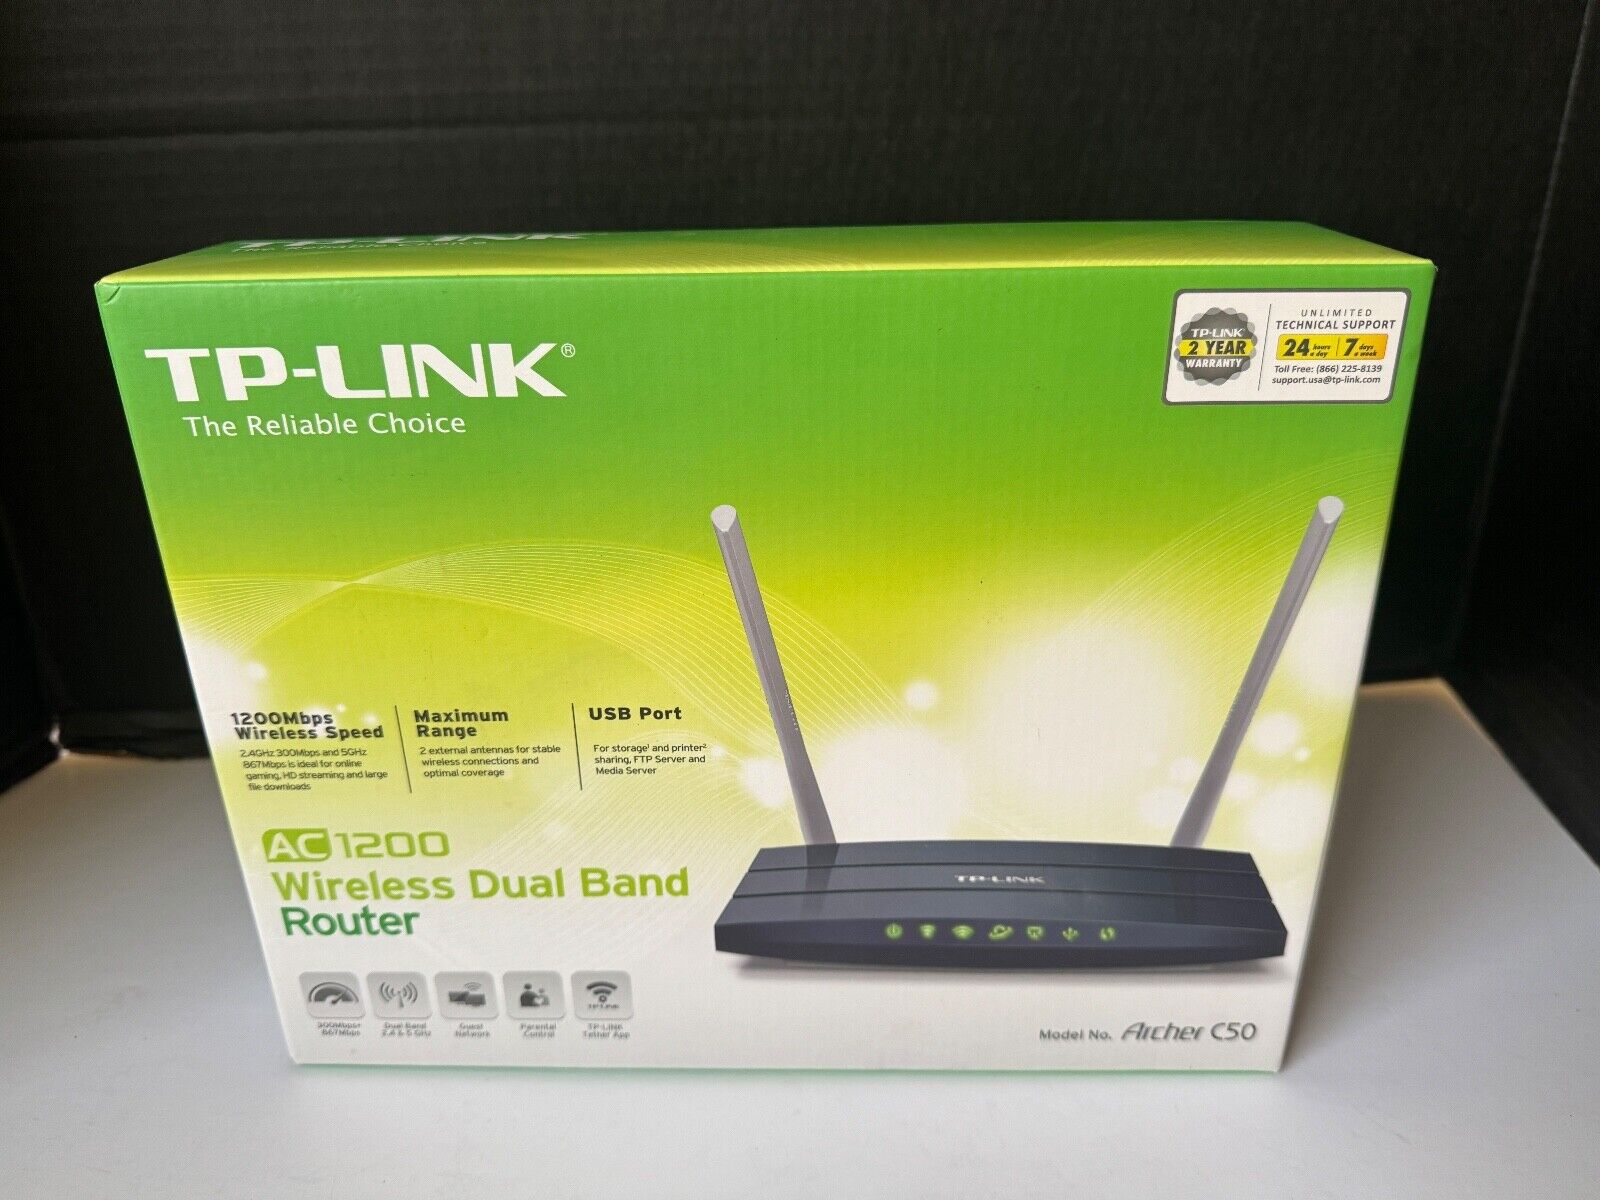 TP-Link AC 1200 Mbps Wireless Dual Band WiFi Router No. Archer C50 MIB